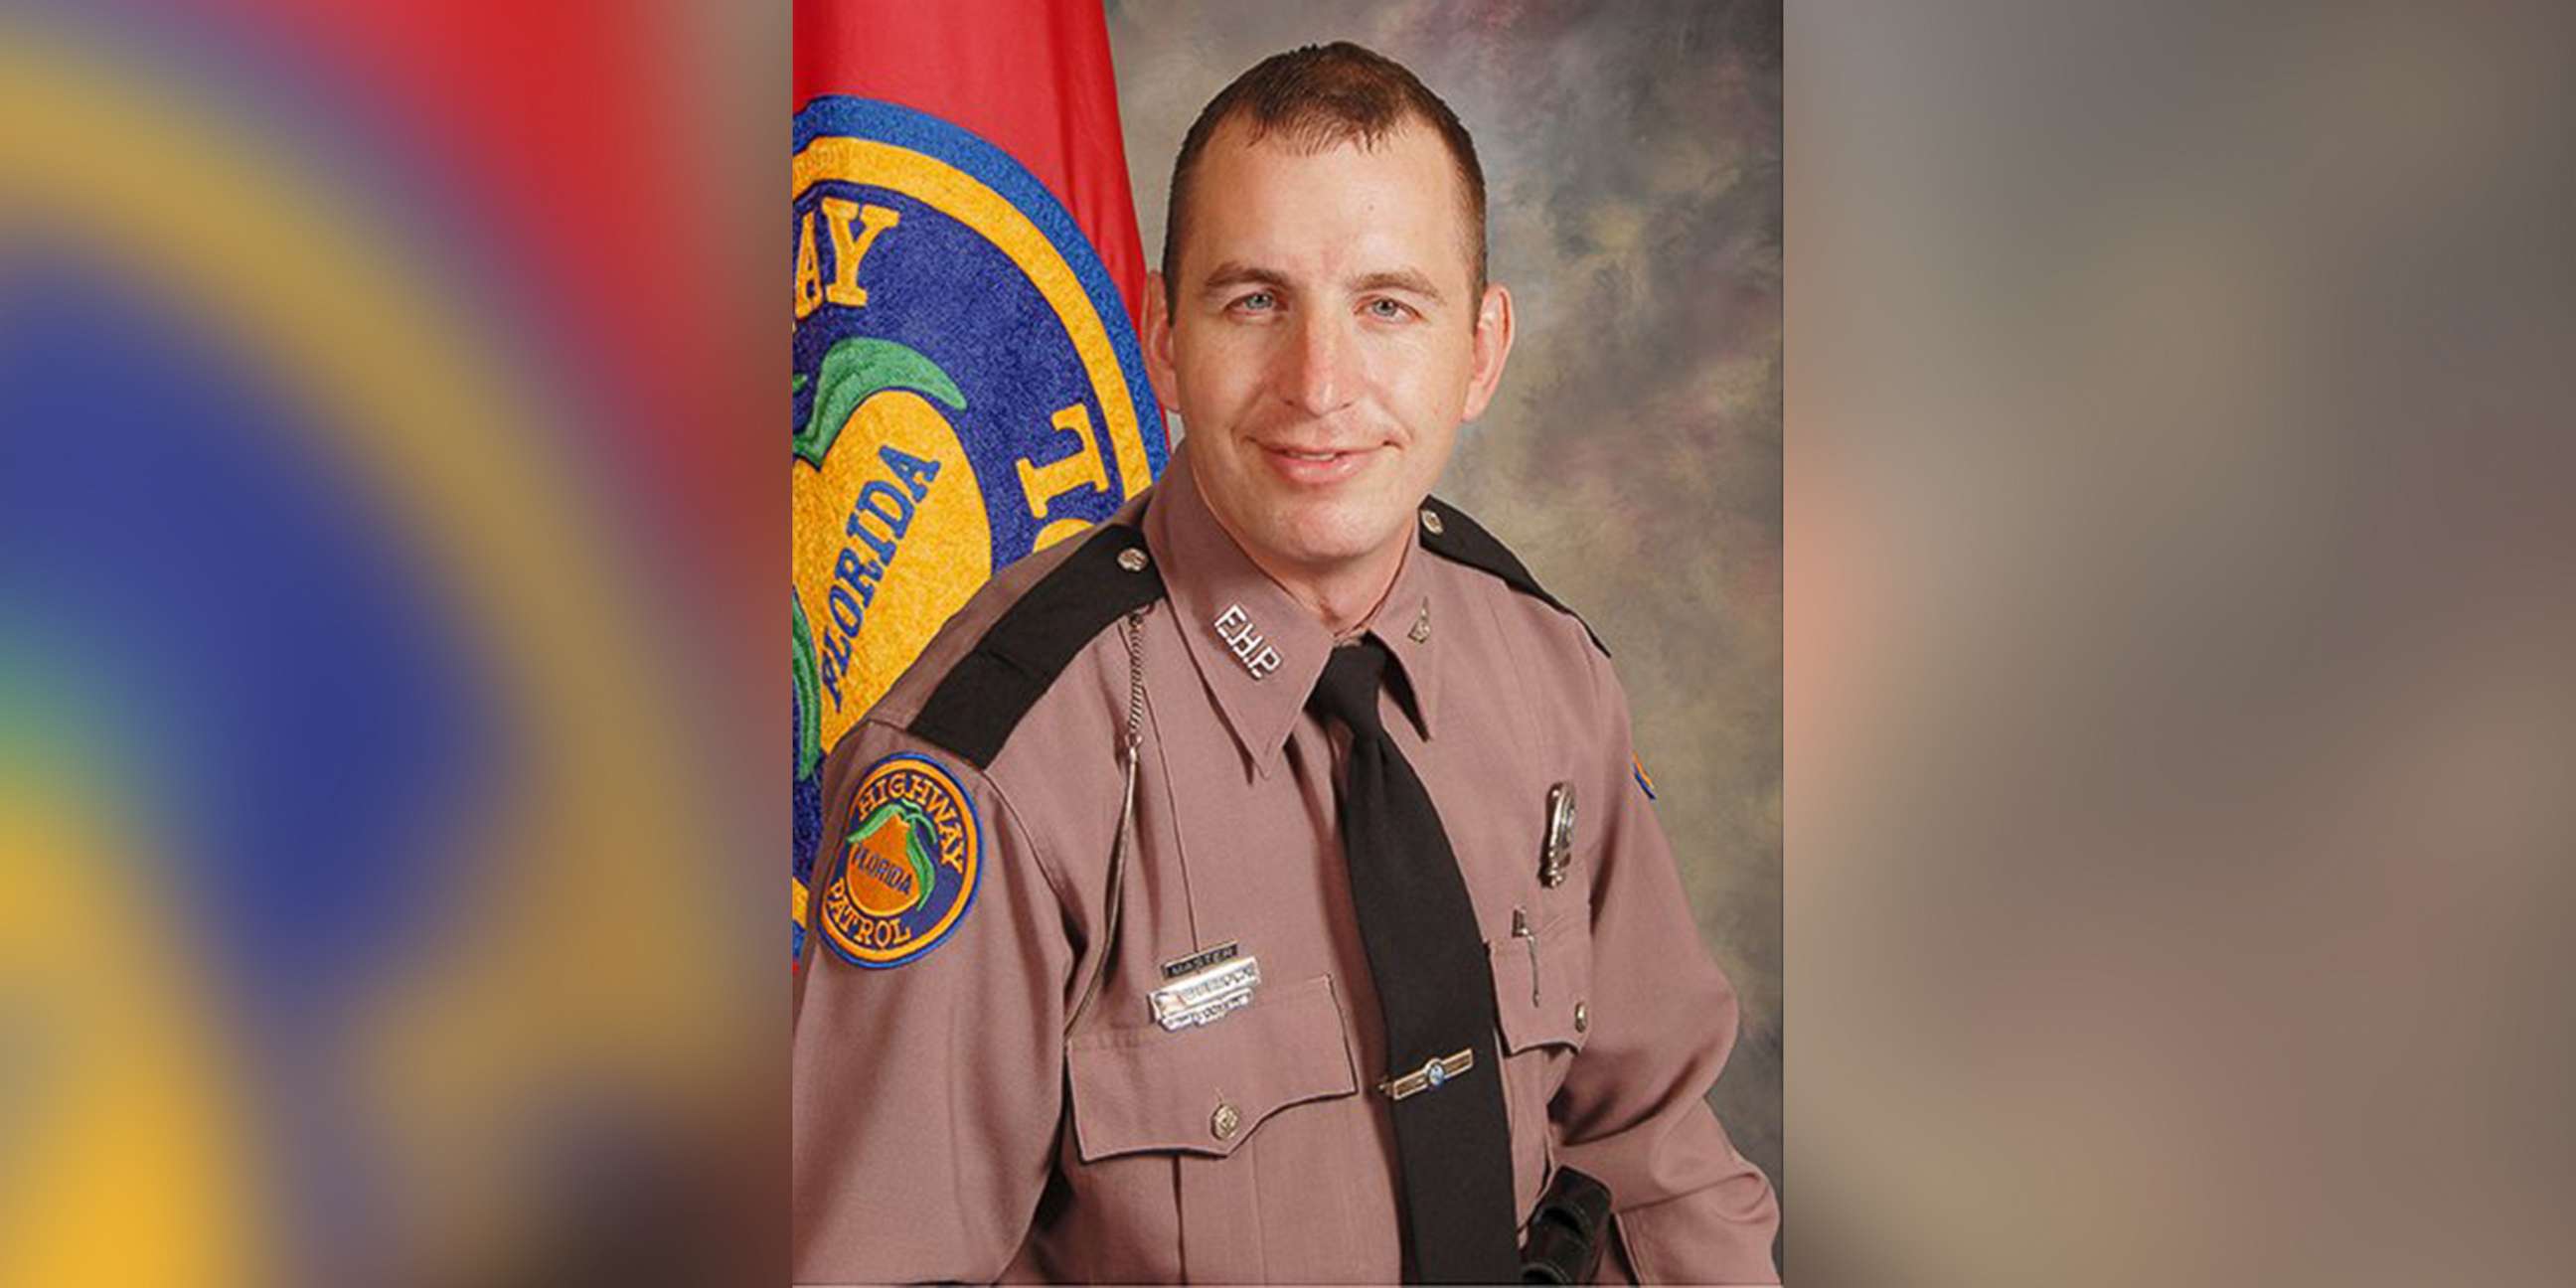 PHOTO: Florida Highway Patrol Trooper Joseph Bullock was fatally wounded while assisting civilians on highway I-95 in Martin County, Fla., Feb. 5, 2020.